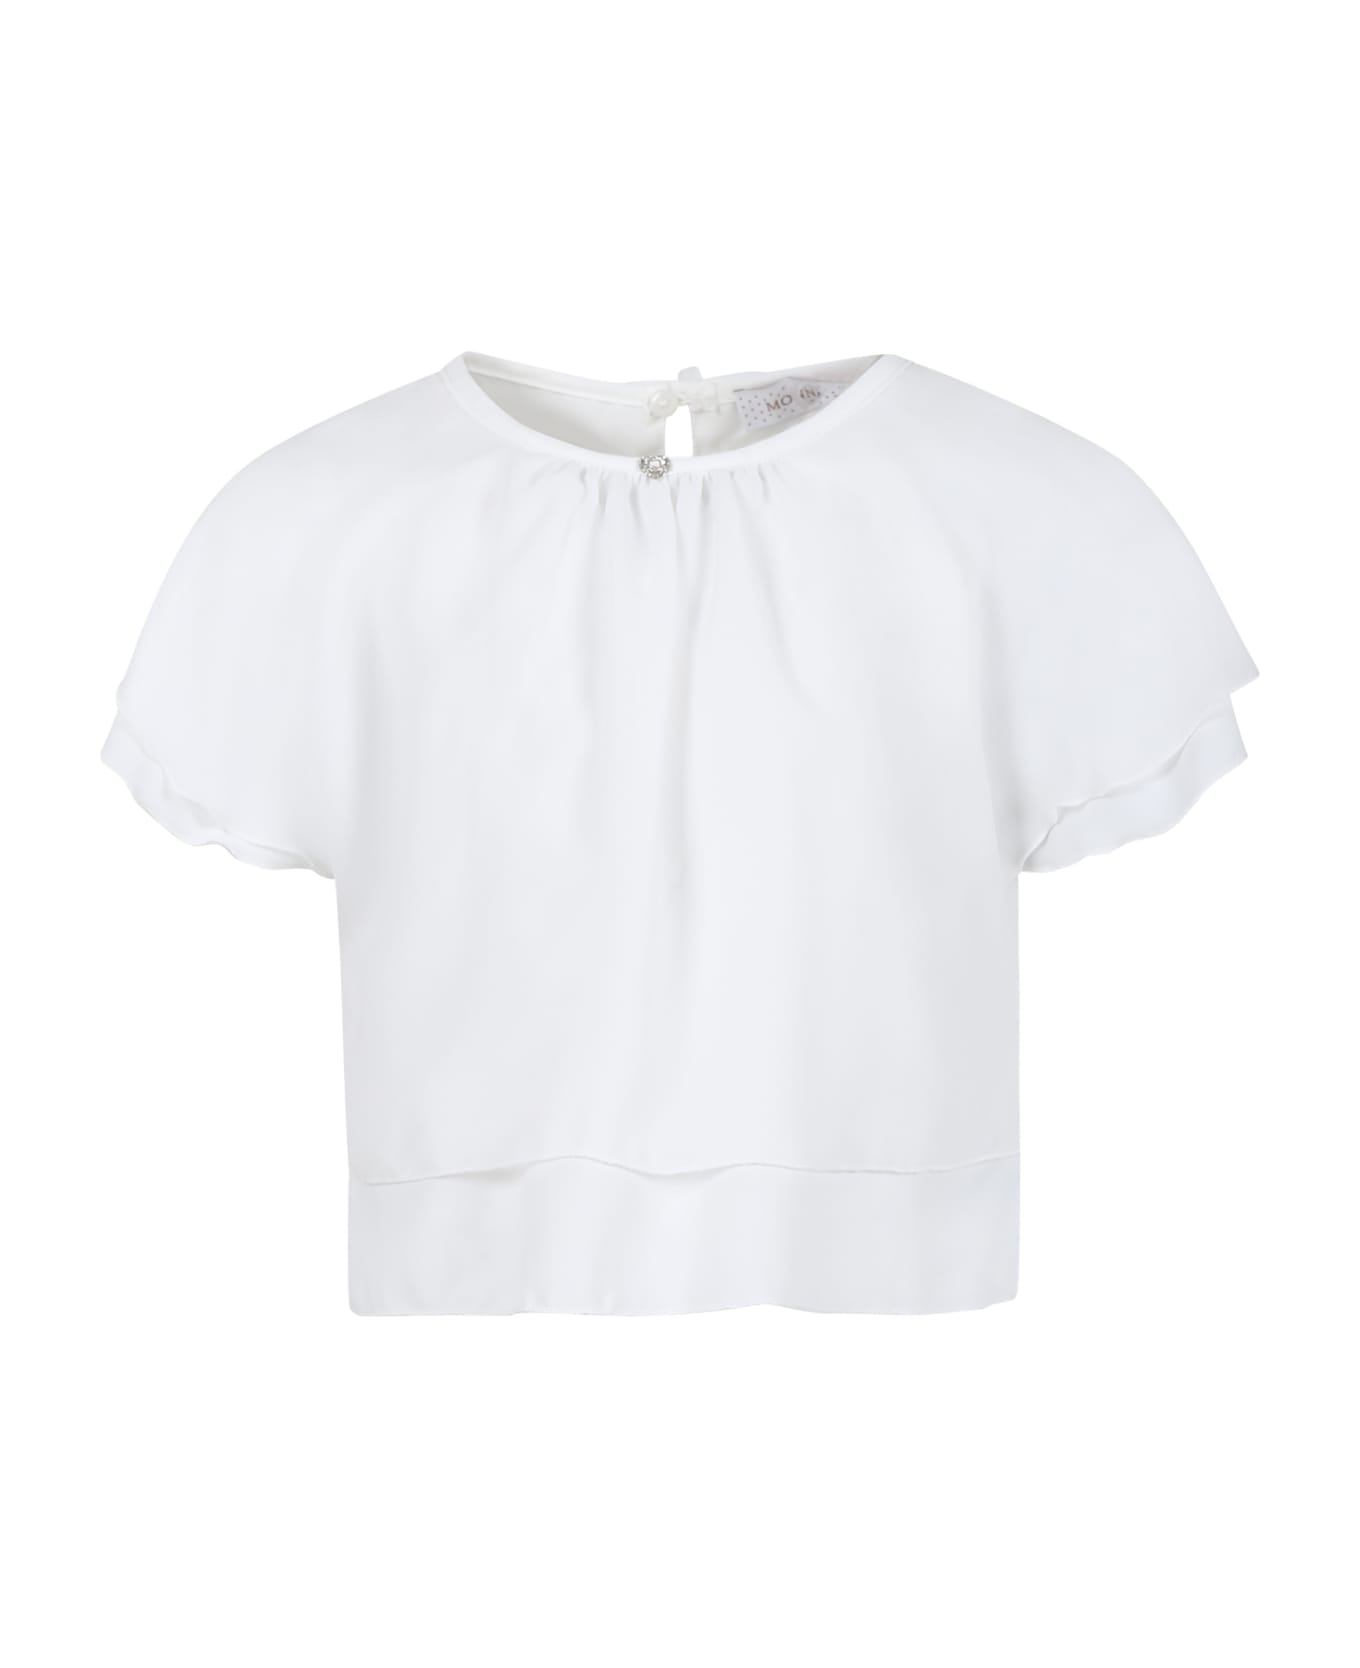 Monnalisa White Top For Girl With Bows - White